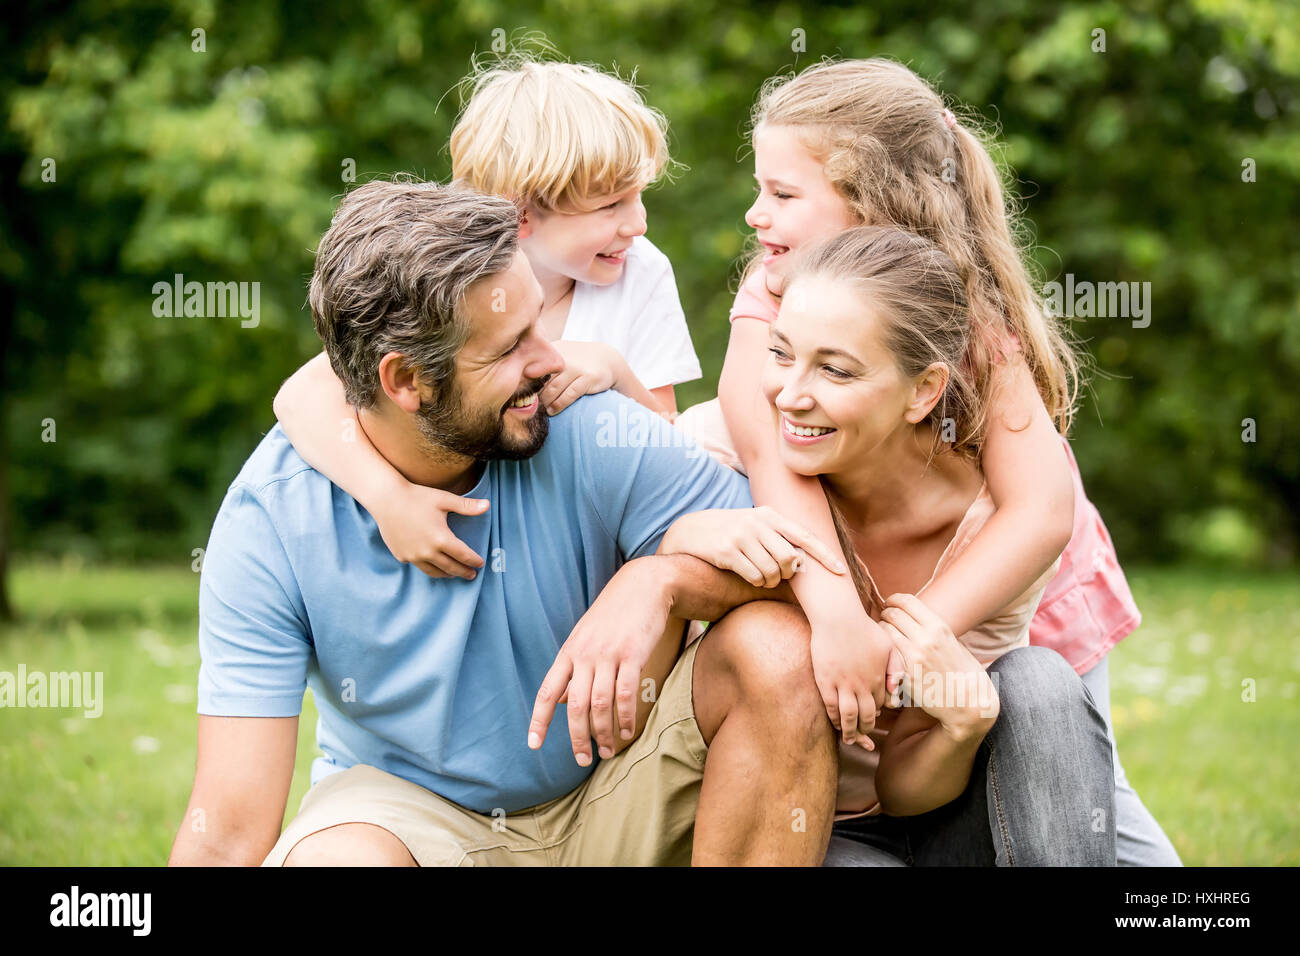 Children and parents as happy family together in a big hug Stock Photo